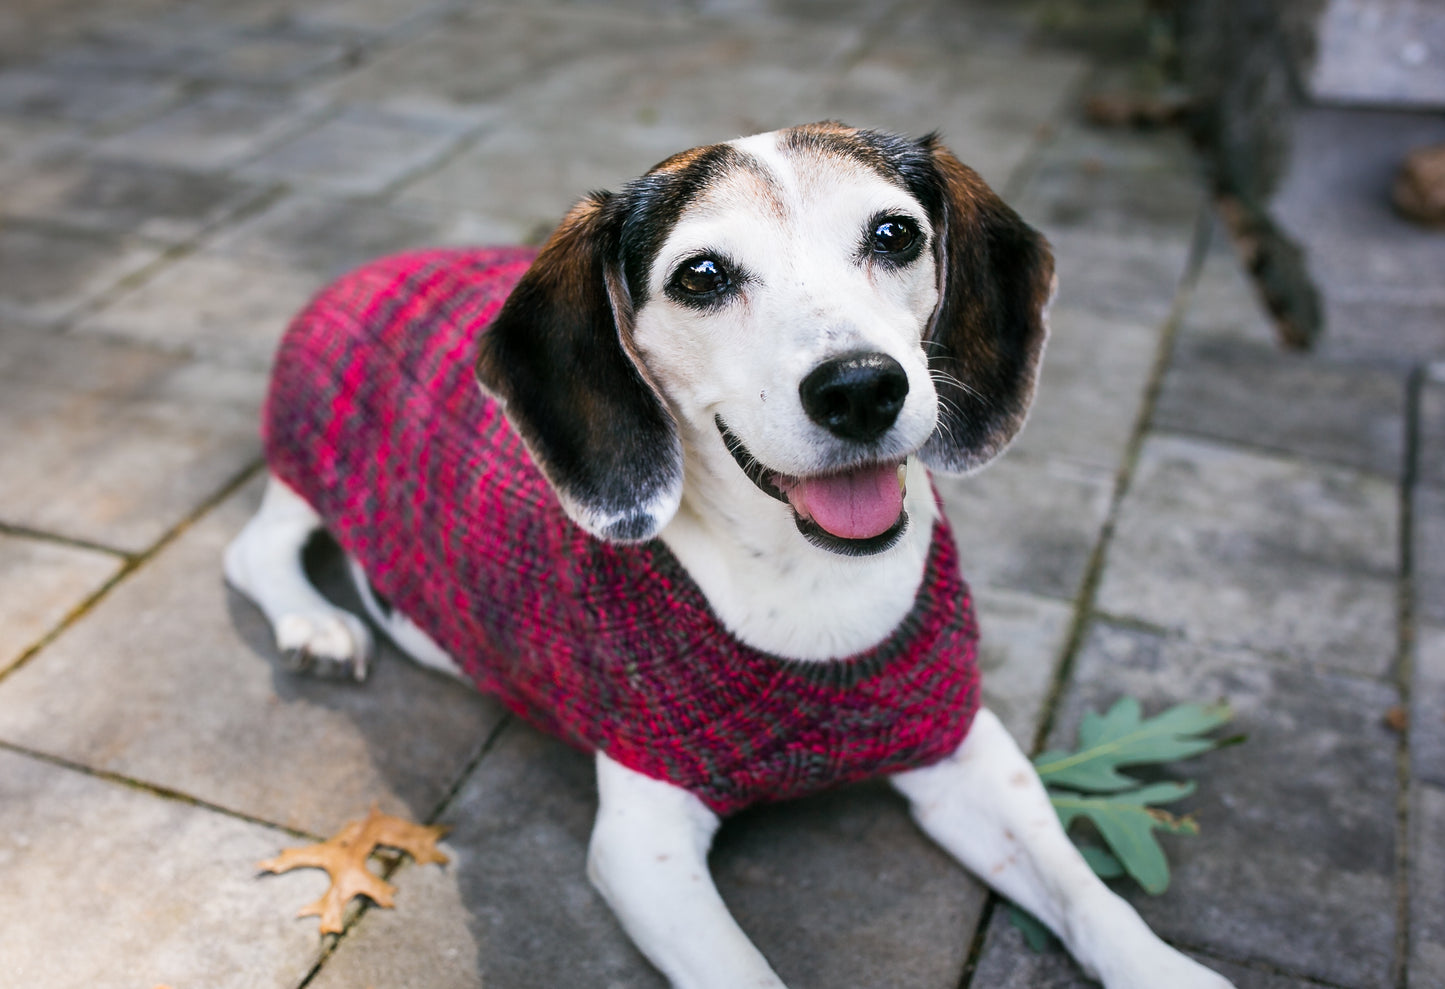 Cat & Dog Pet Sweaters in Granville - VERY LIMITED QUANTITY AND LAST OF THIS COLORWAY!